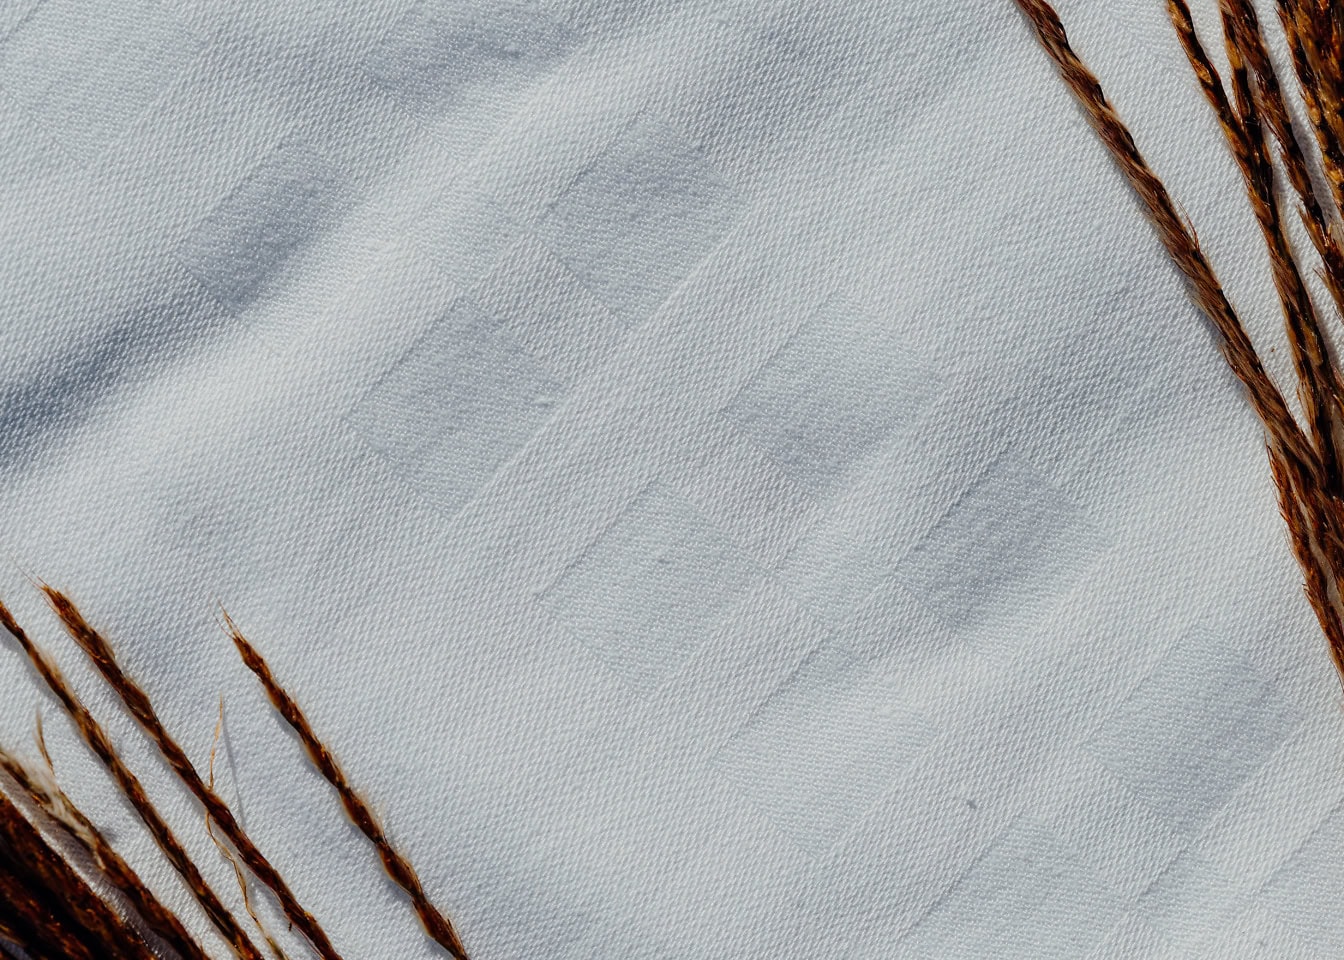 Close-up of a white cotton handkerchief with dark brown straws in corners